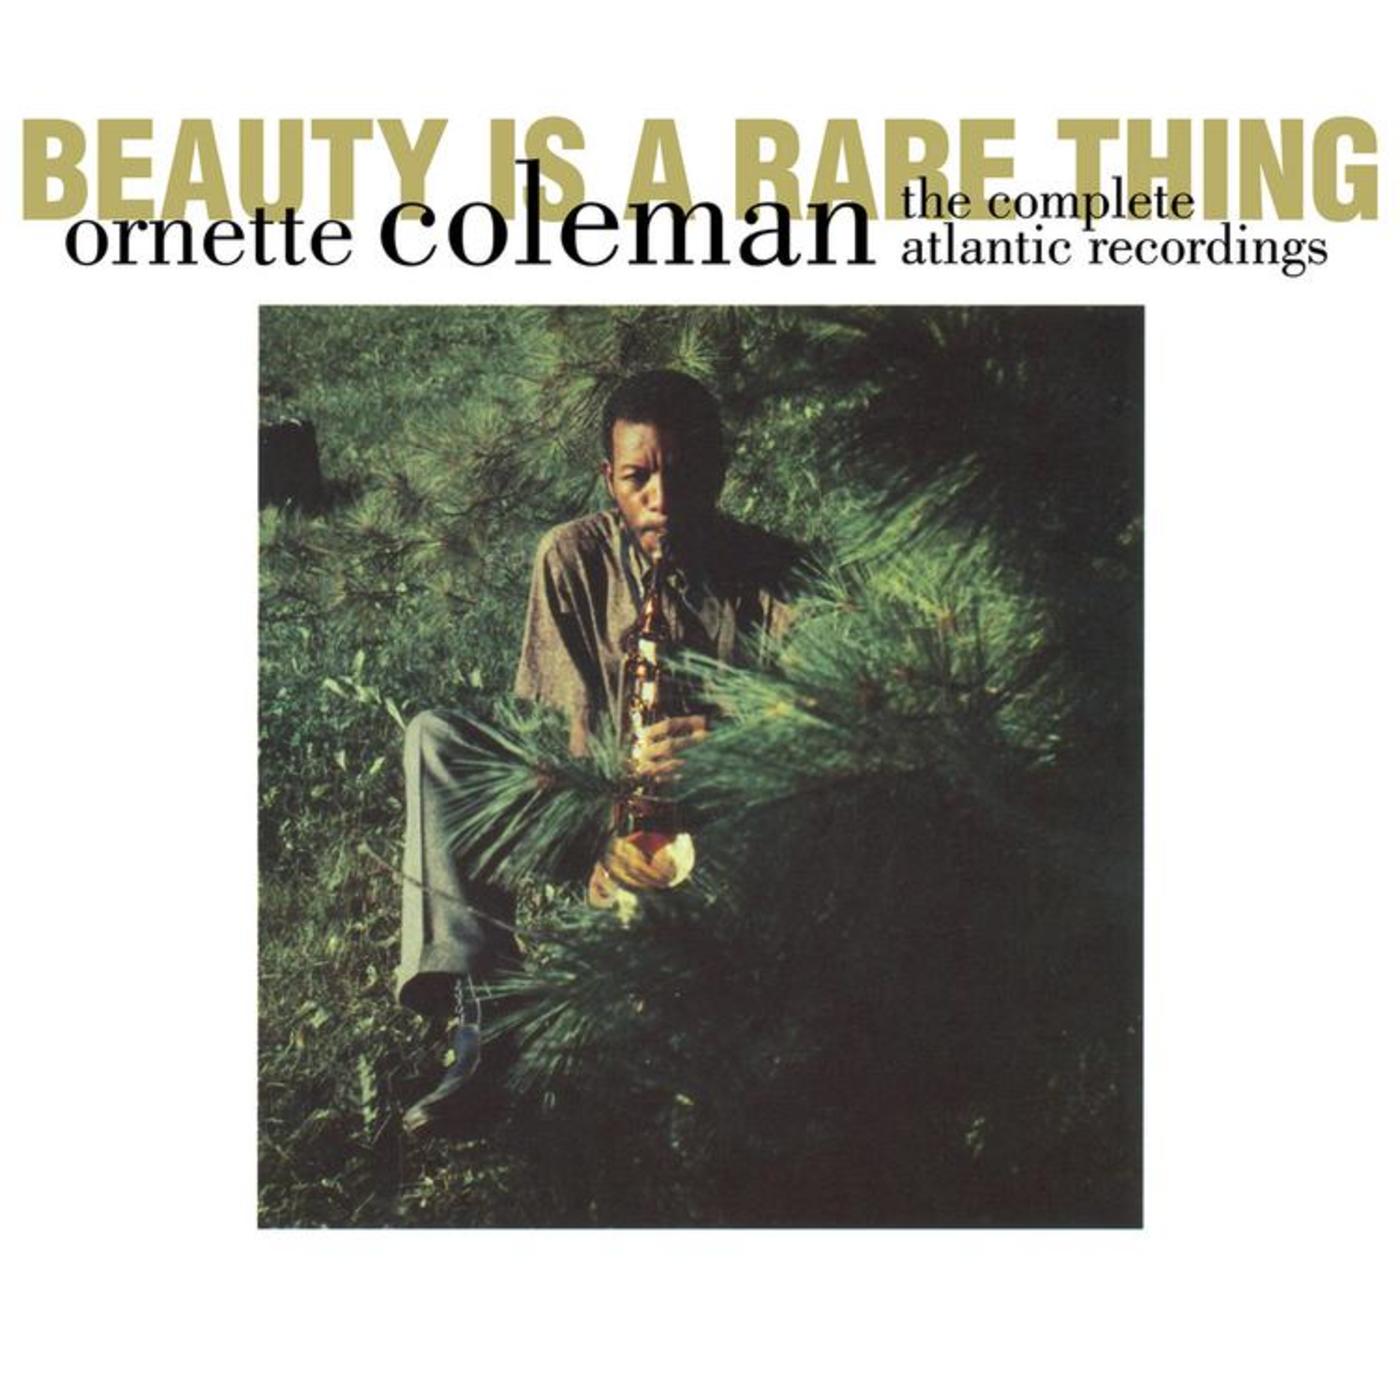 Ornette Coleman: Beauty Is A Rare Thing - The Complete Atlantic Recordings